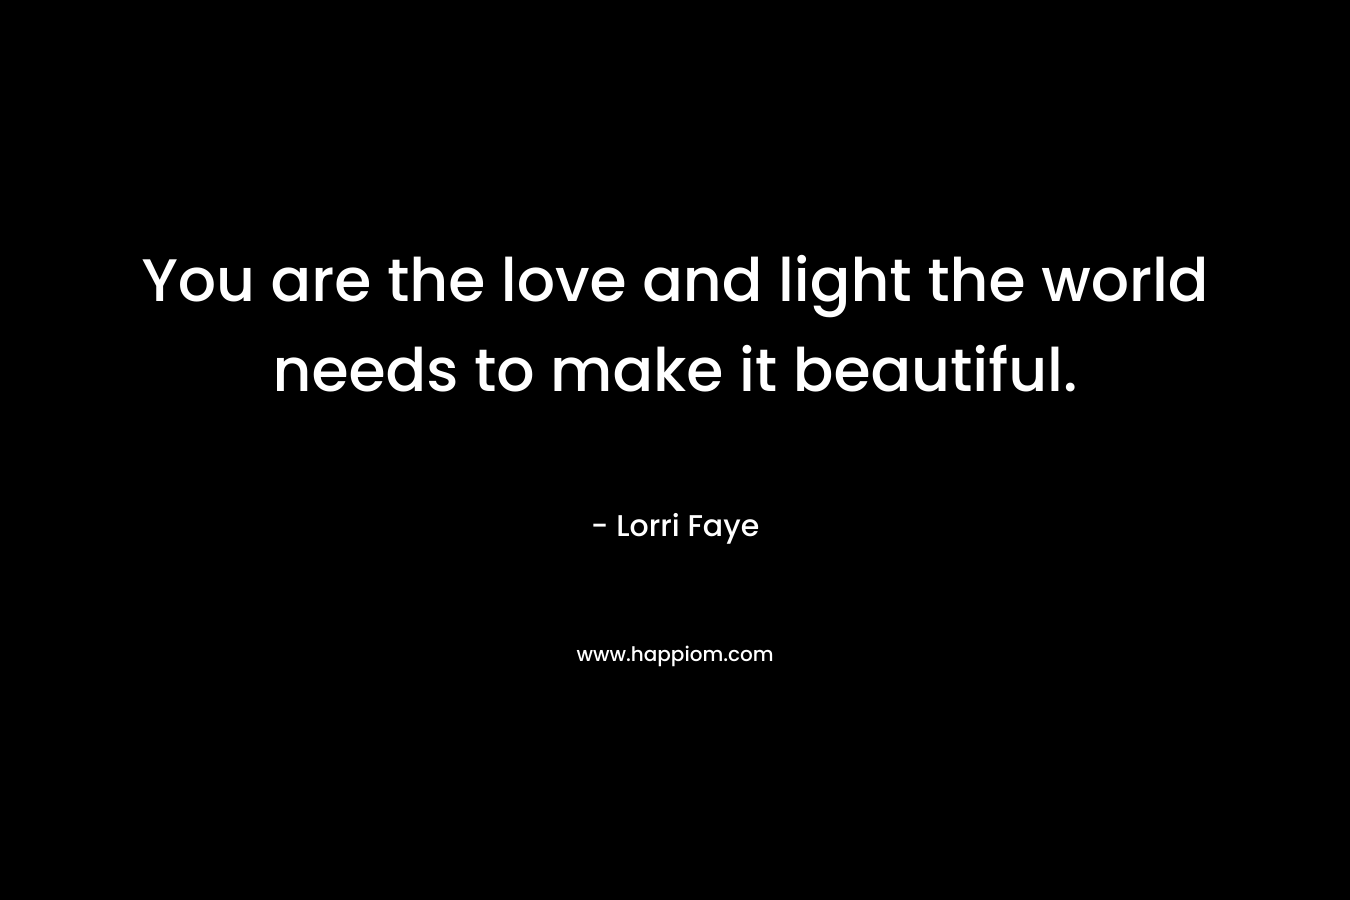 You are the love and light the world needs to make it beautiful. – Lorri Faye